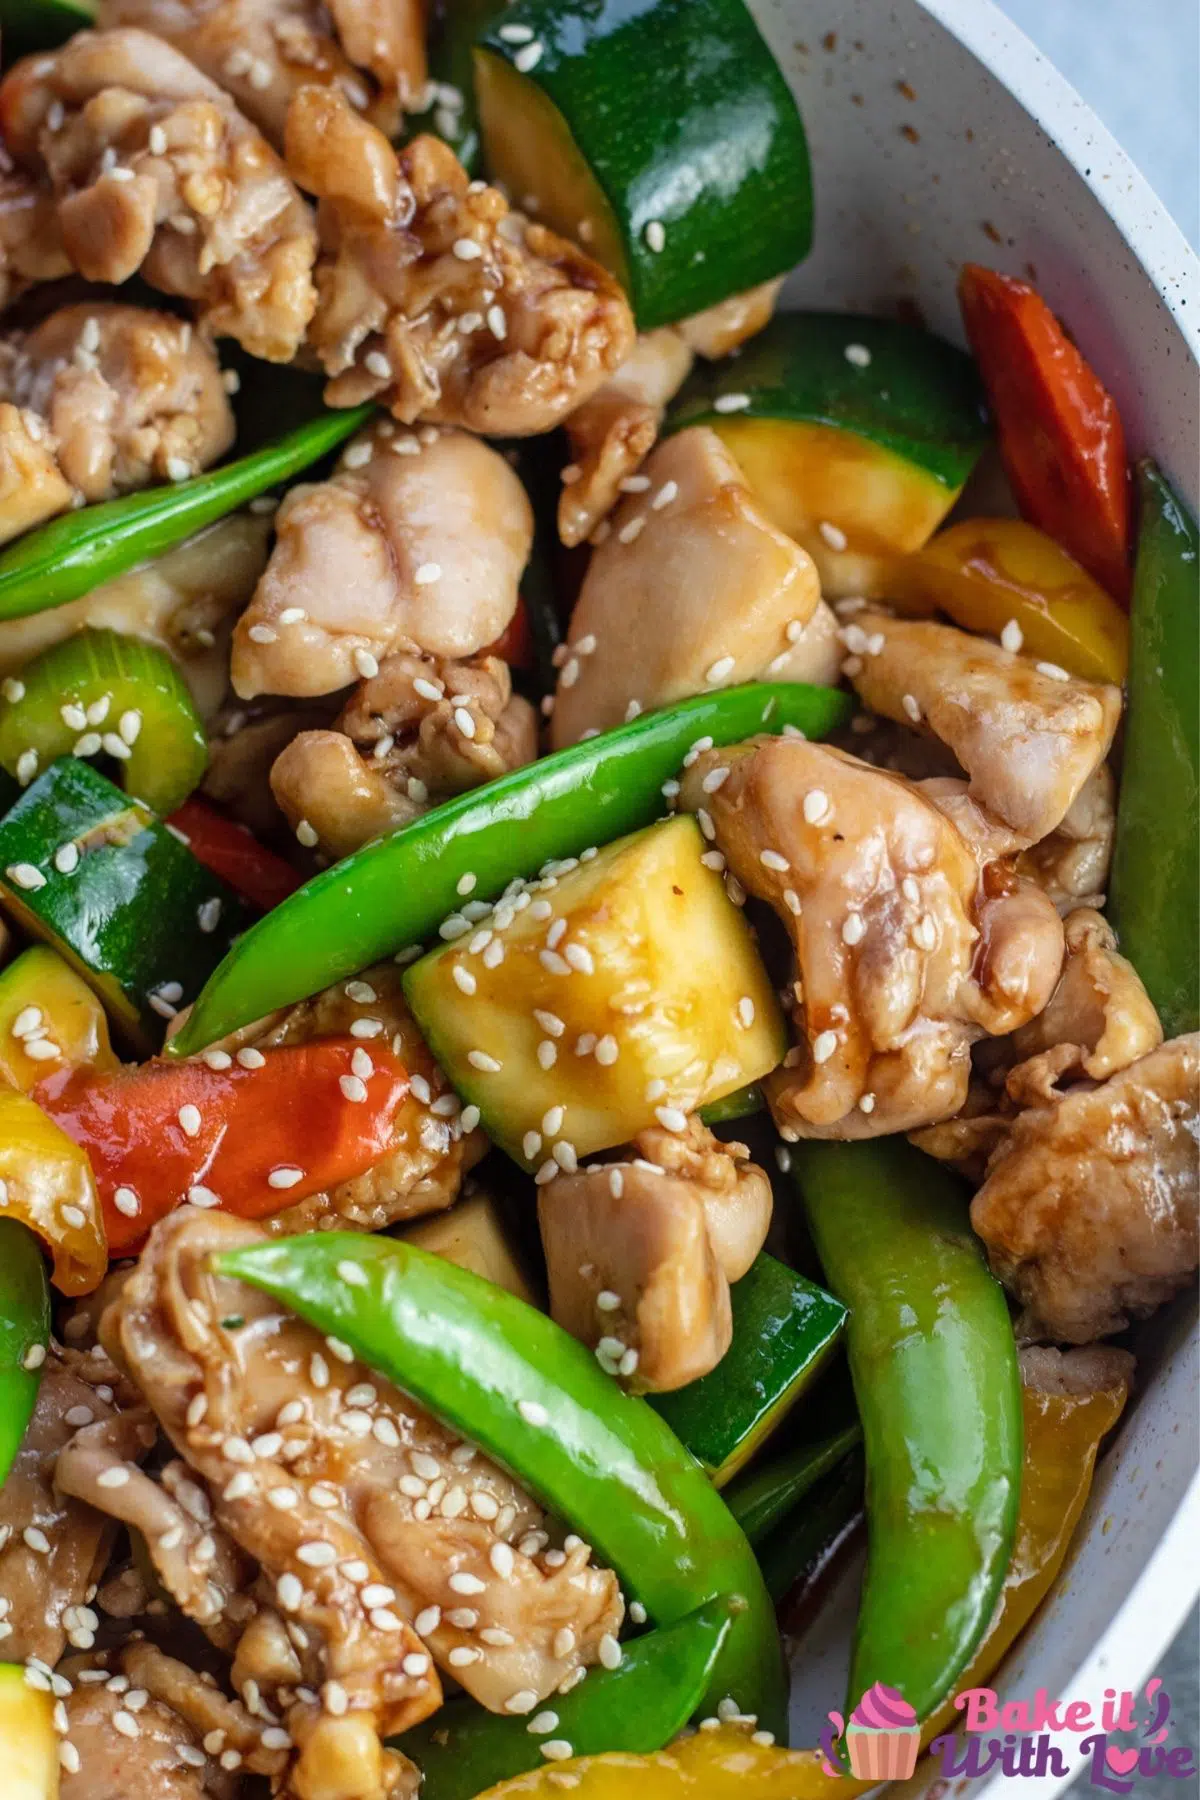 Tall overhead of the teriyaki chicken stir fry in light colored skillet.